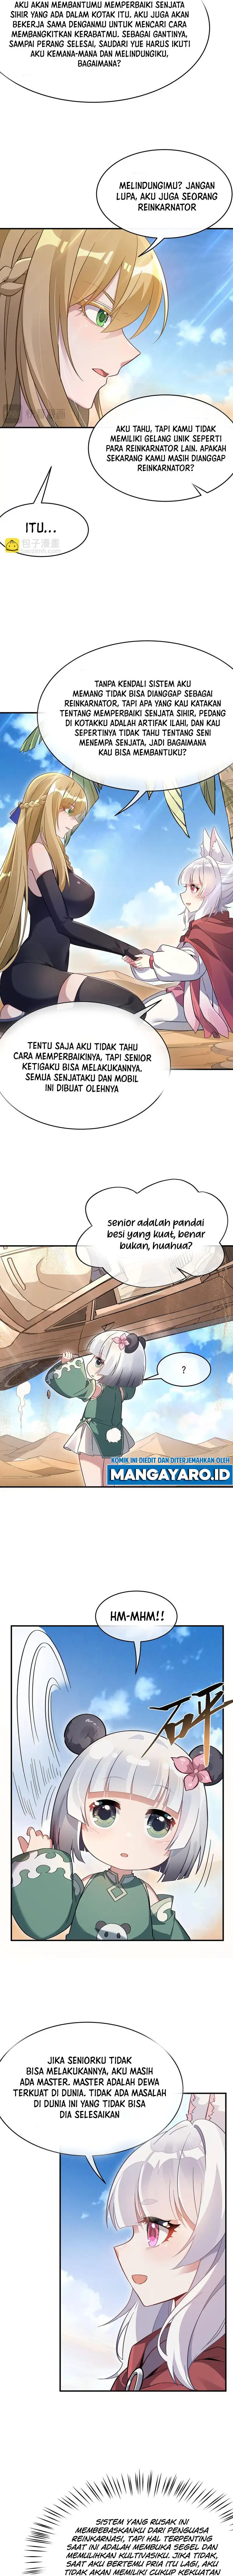 Dilarang COPAS - situs resmi www.mangacanblog.com - Komik my female apprentices are all big shots from the future 227 - chapter 227 228 Indonesia my female apprentices are all big shots from the future 227 - chapter 227 Terbaru 4|Baca Manga Komik Indonesia|Mangacan